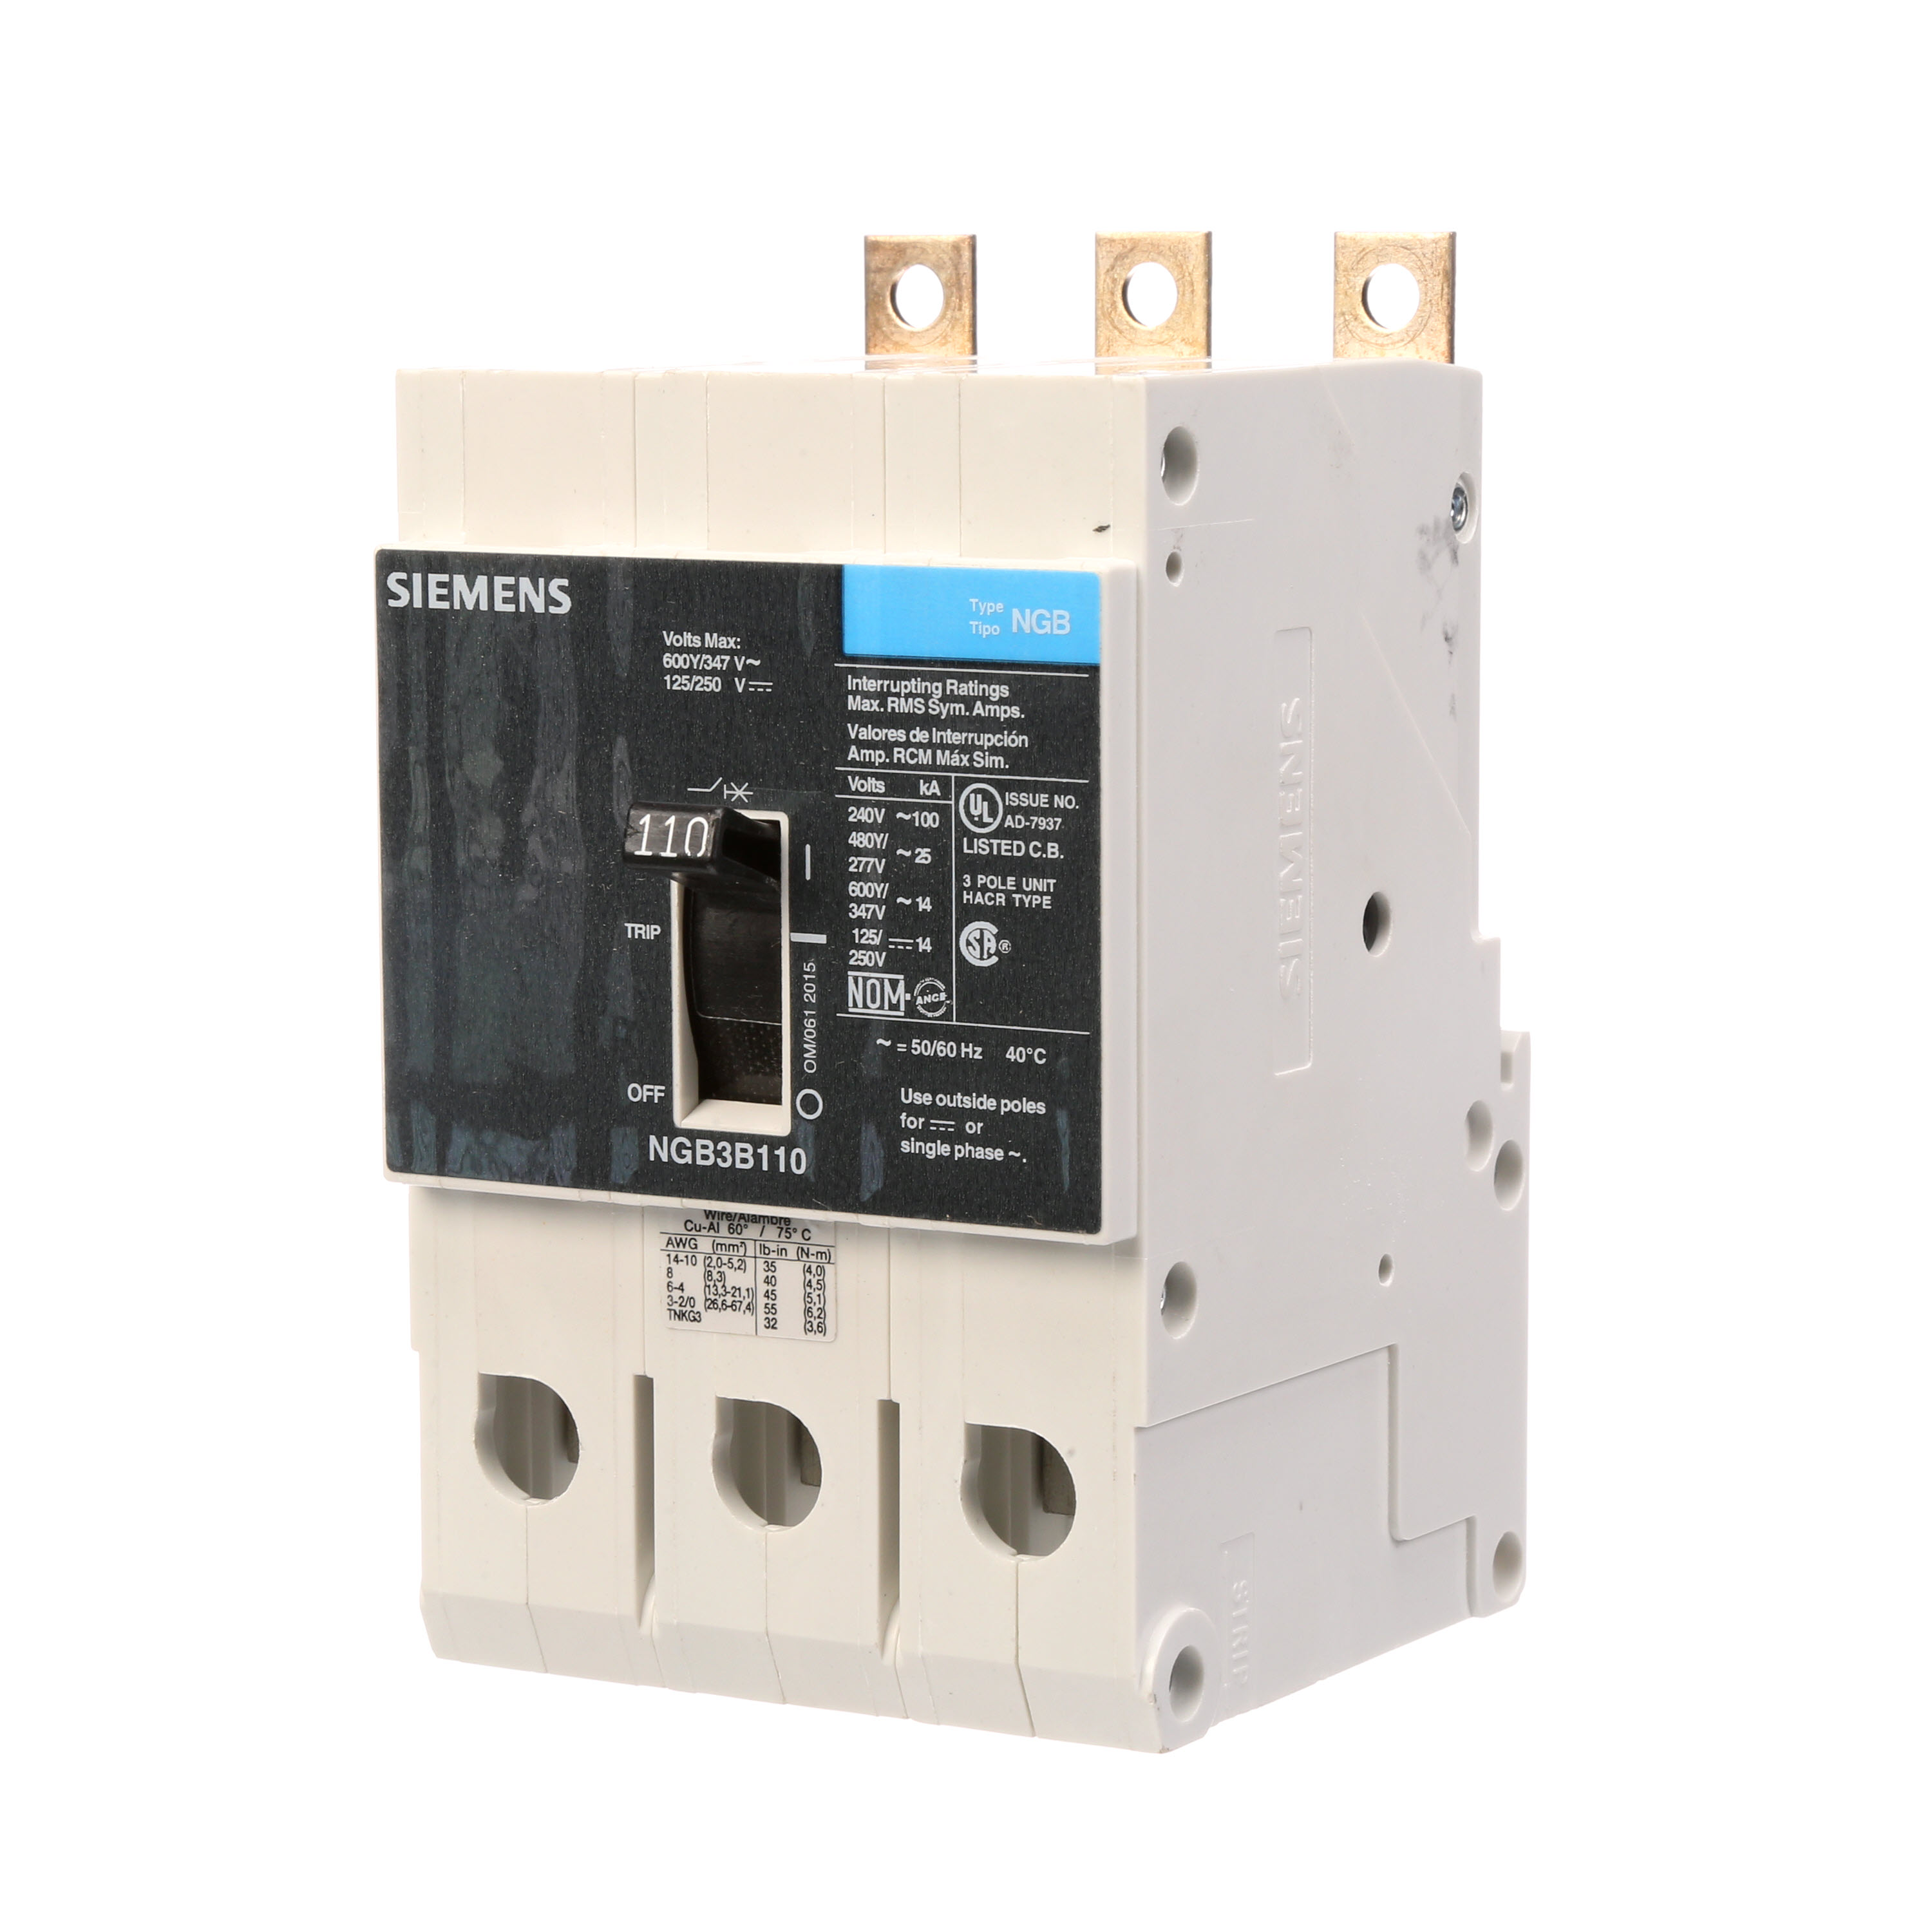 SIEMENS LOW VOLTAGE PANELBOARD MOUNT G FRAME CIRCUIT BREAKER WITH THERMAL - MAGNETIC TRIP. UL LISTED NGB FRAME WITH STANDARD BREAKING CAPACITY. 110A 3-POLE (14KAIC AT 600Y/347V) (25KAIC AT 480Y/277V). SPECIAL FEATURES MOUNTS ON PANELBOARD,LOAD SIDE LUGS ONLY (TC1GG20) WIRE RANGE 8 - 1/0 AWS (CU/AL). DIMENSIONS (W x Hx D) IN 3 x 5.4 x 2.8.